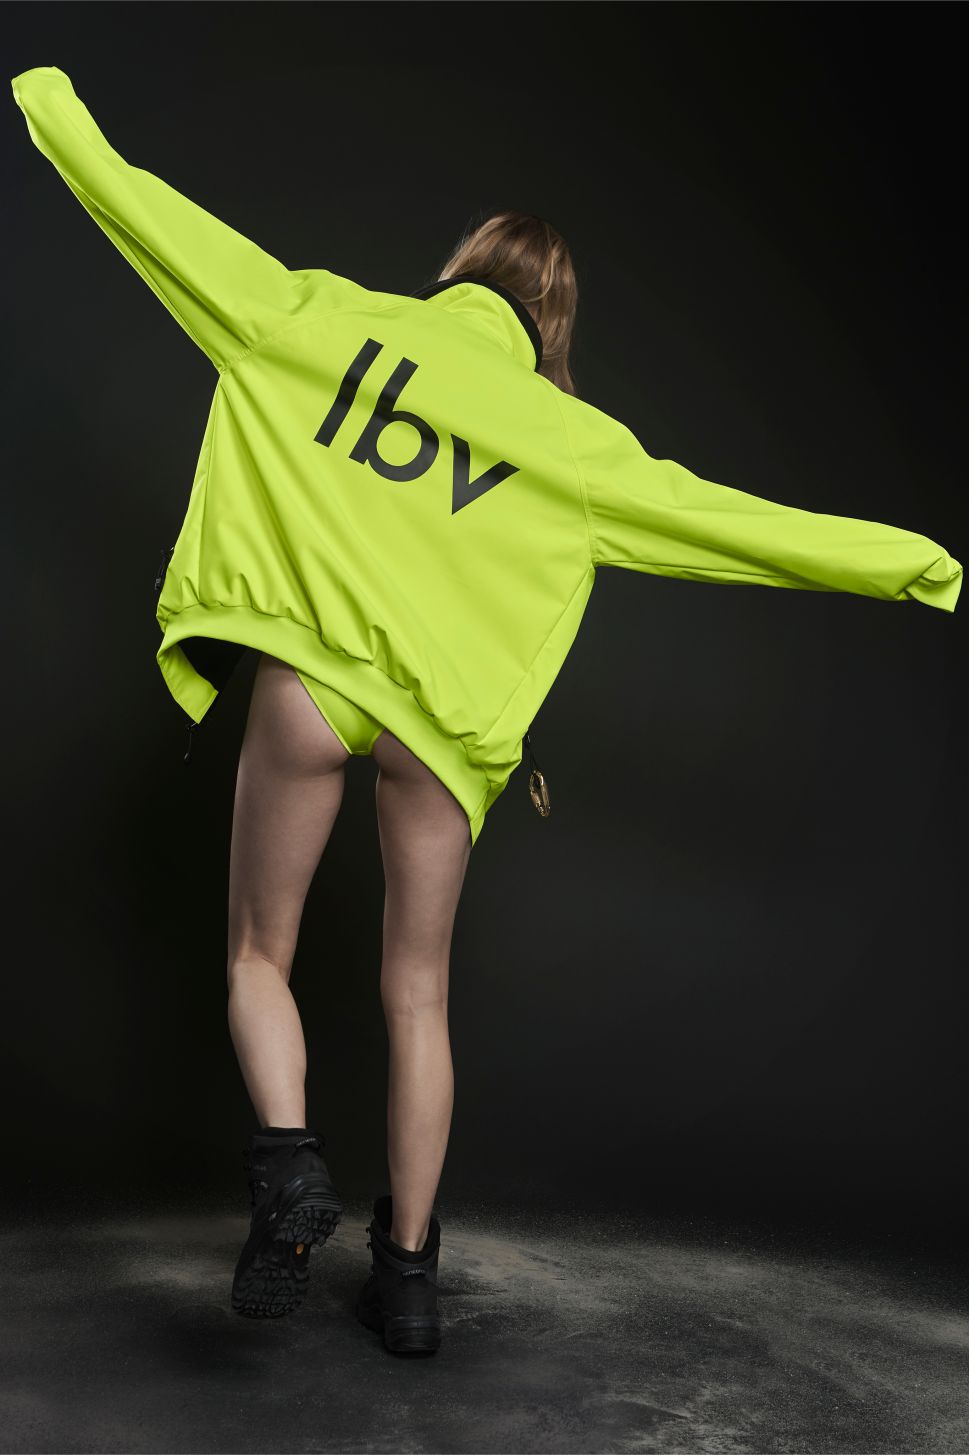 LBV, Joss Sackler’s Club, Launches Fashion for Women Undeterred by Her Purdue Pharma Ties